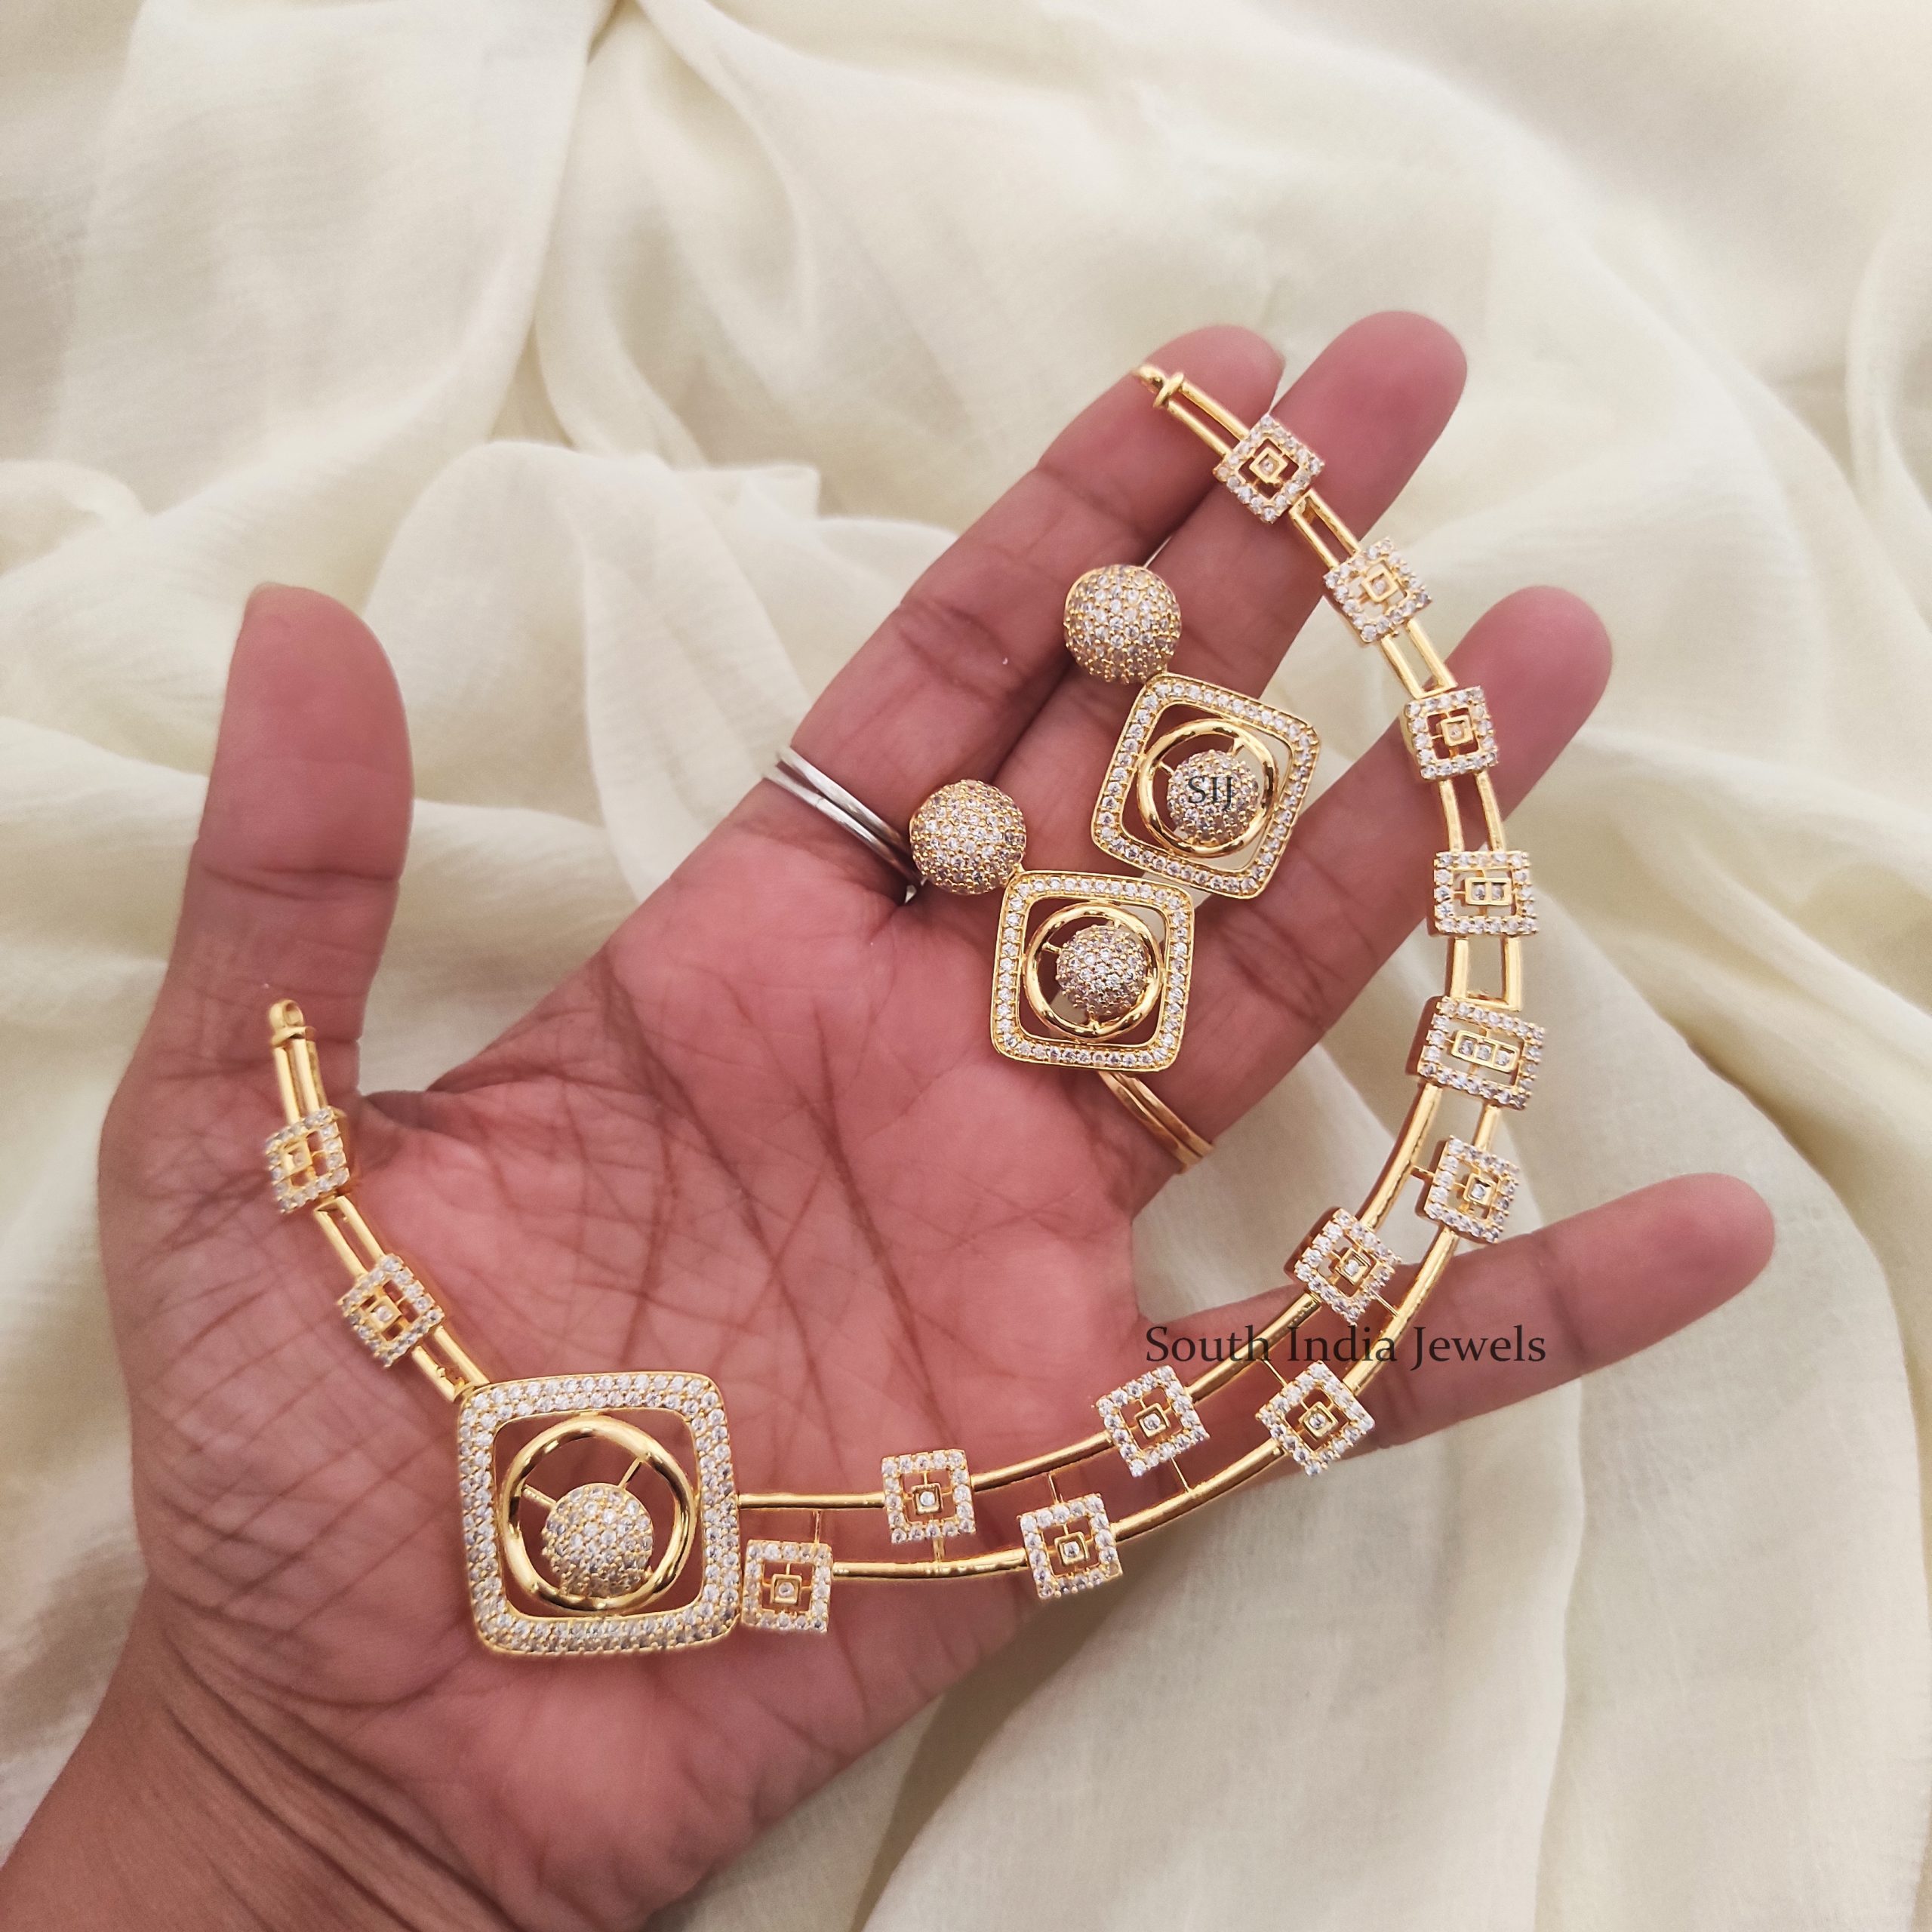 Pandora  We love this cute bracelet designed by PANDORA fan Joellie Tang  The new Korean doll charm  inspired by the traditional Korean Gaksi doll   is a cute and feminine